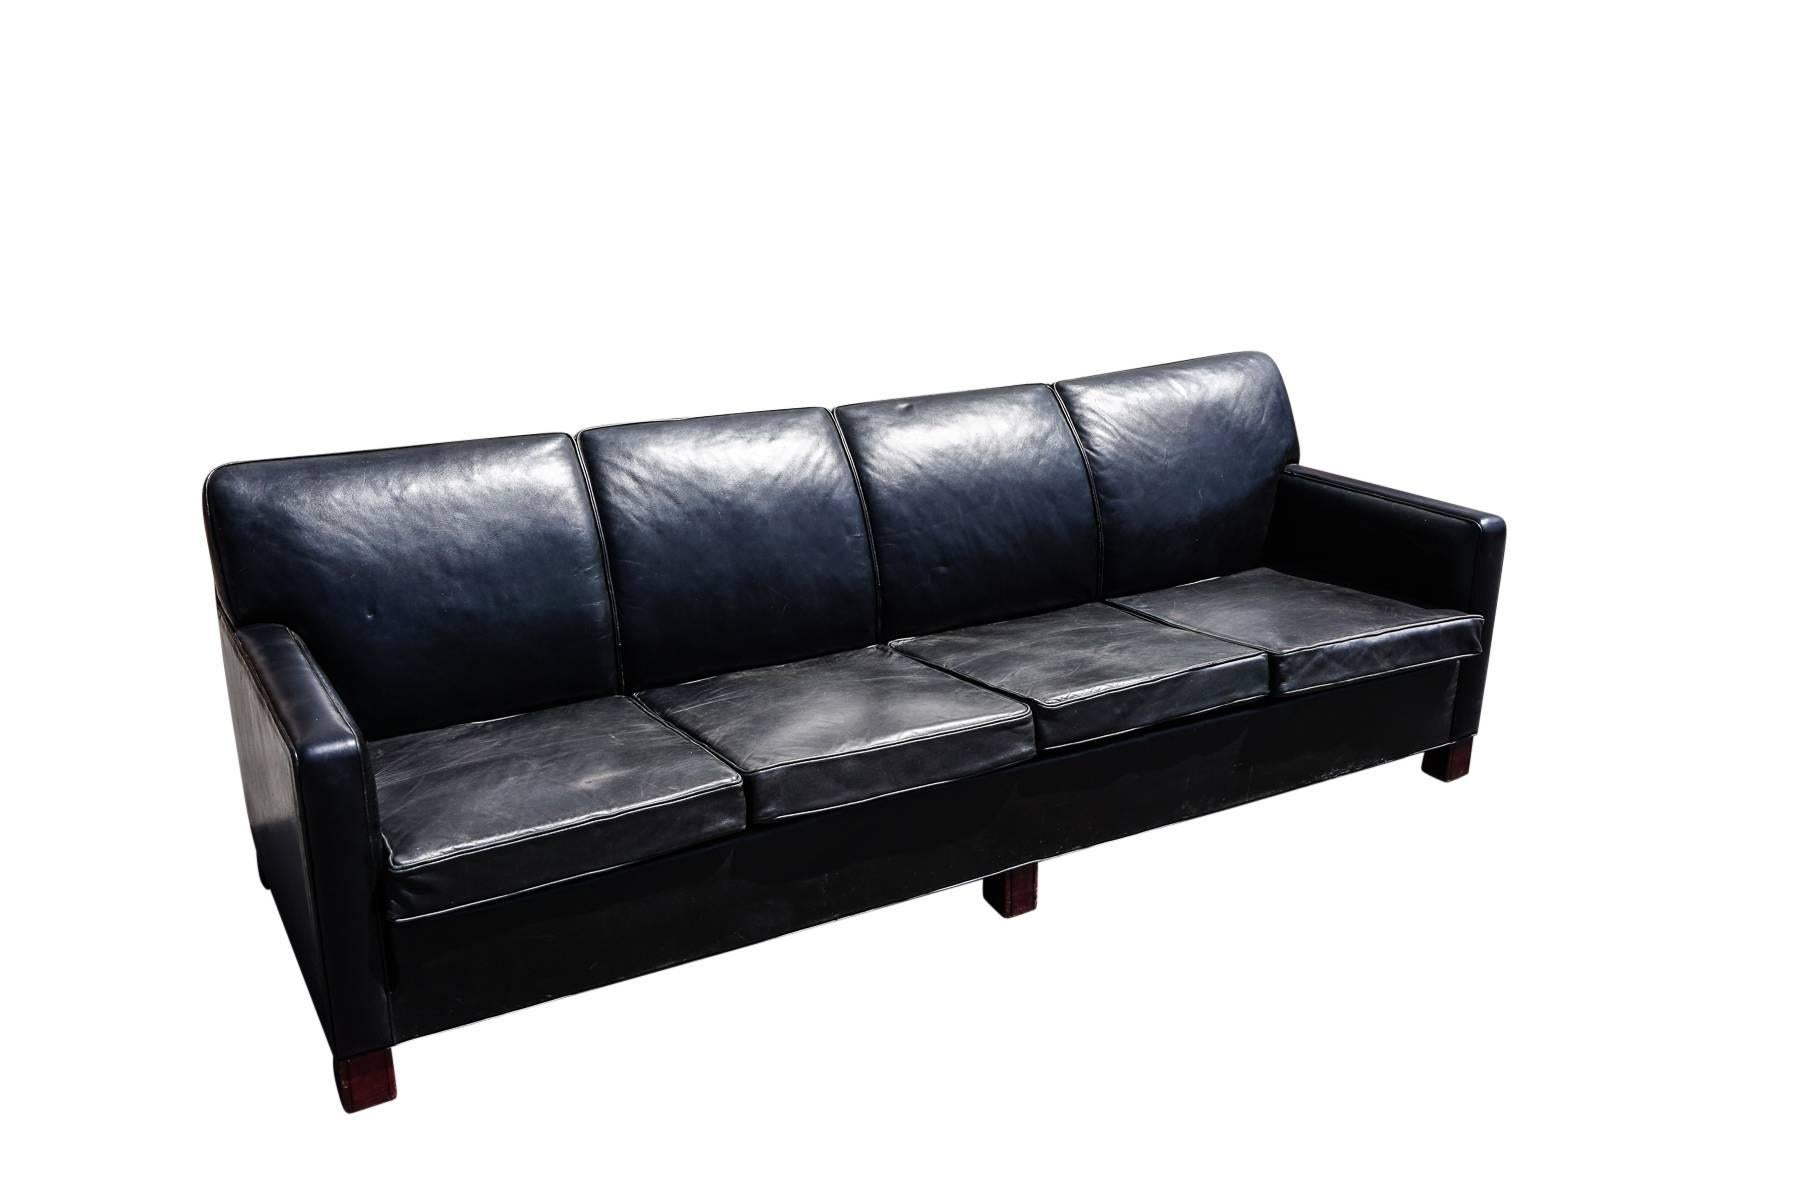 Large Danish four-seat leather sofa, circa 1950 in the style of Flemming Lassen. Very nice quality and design.